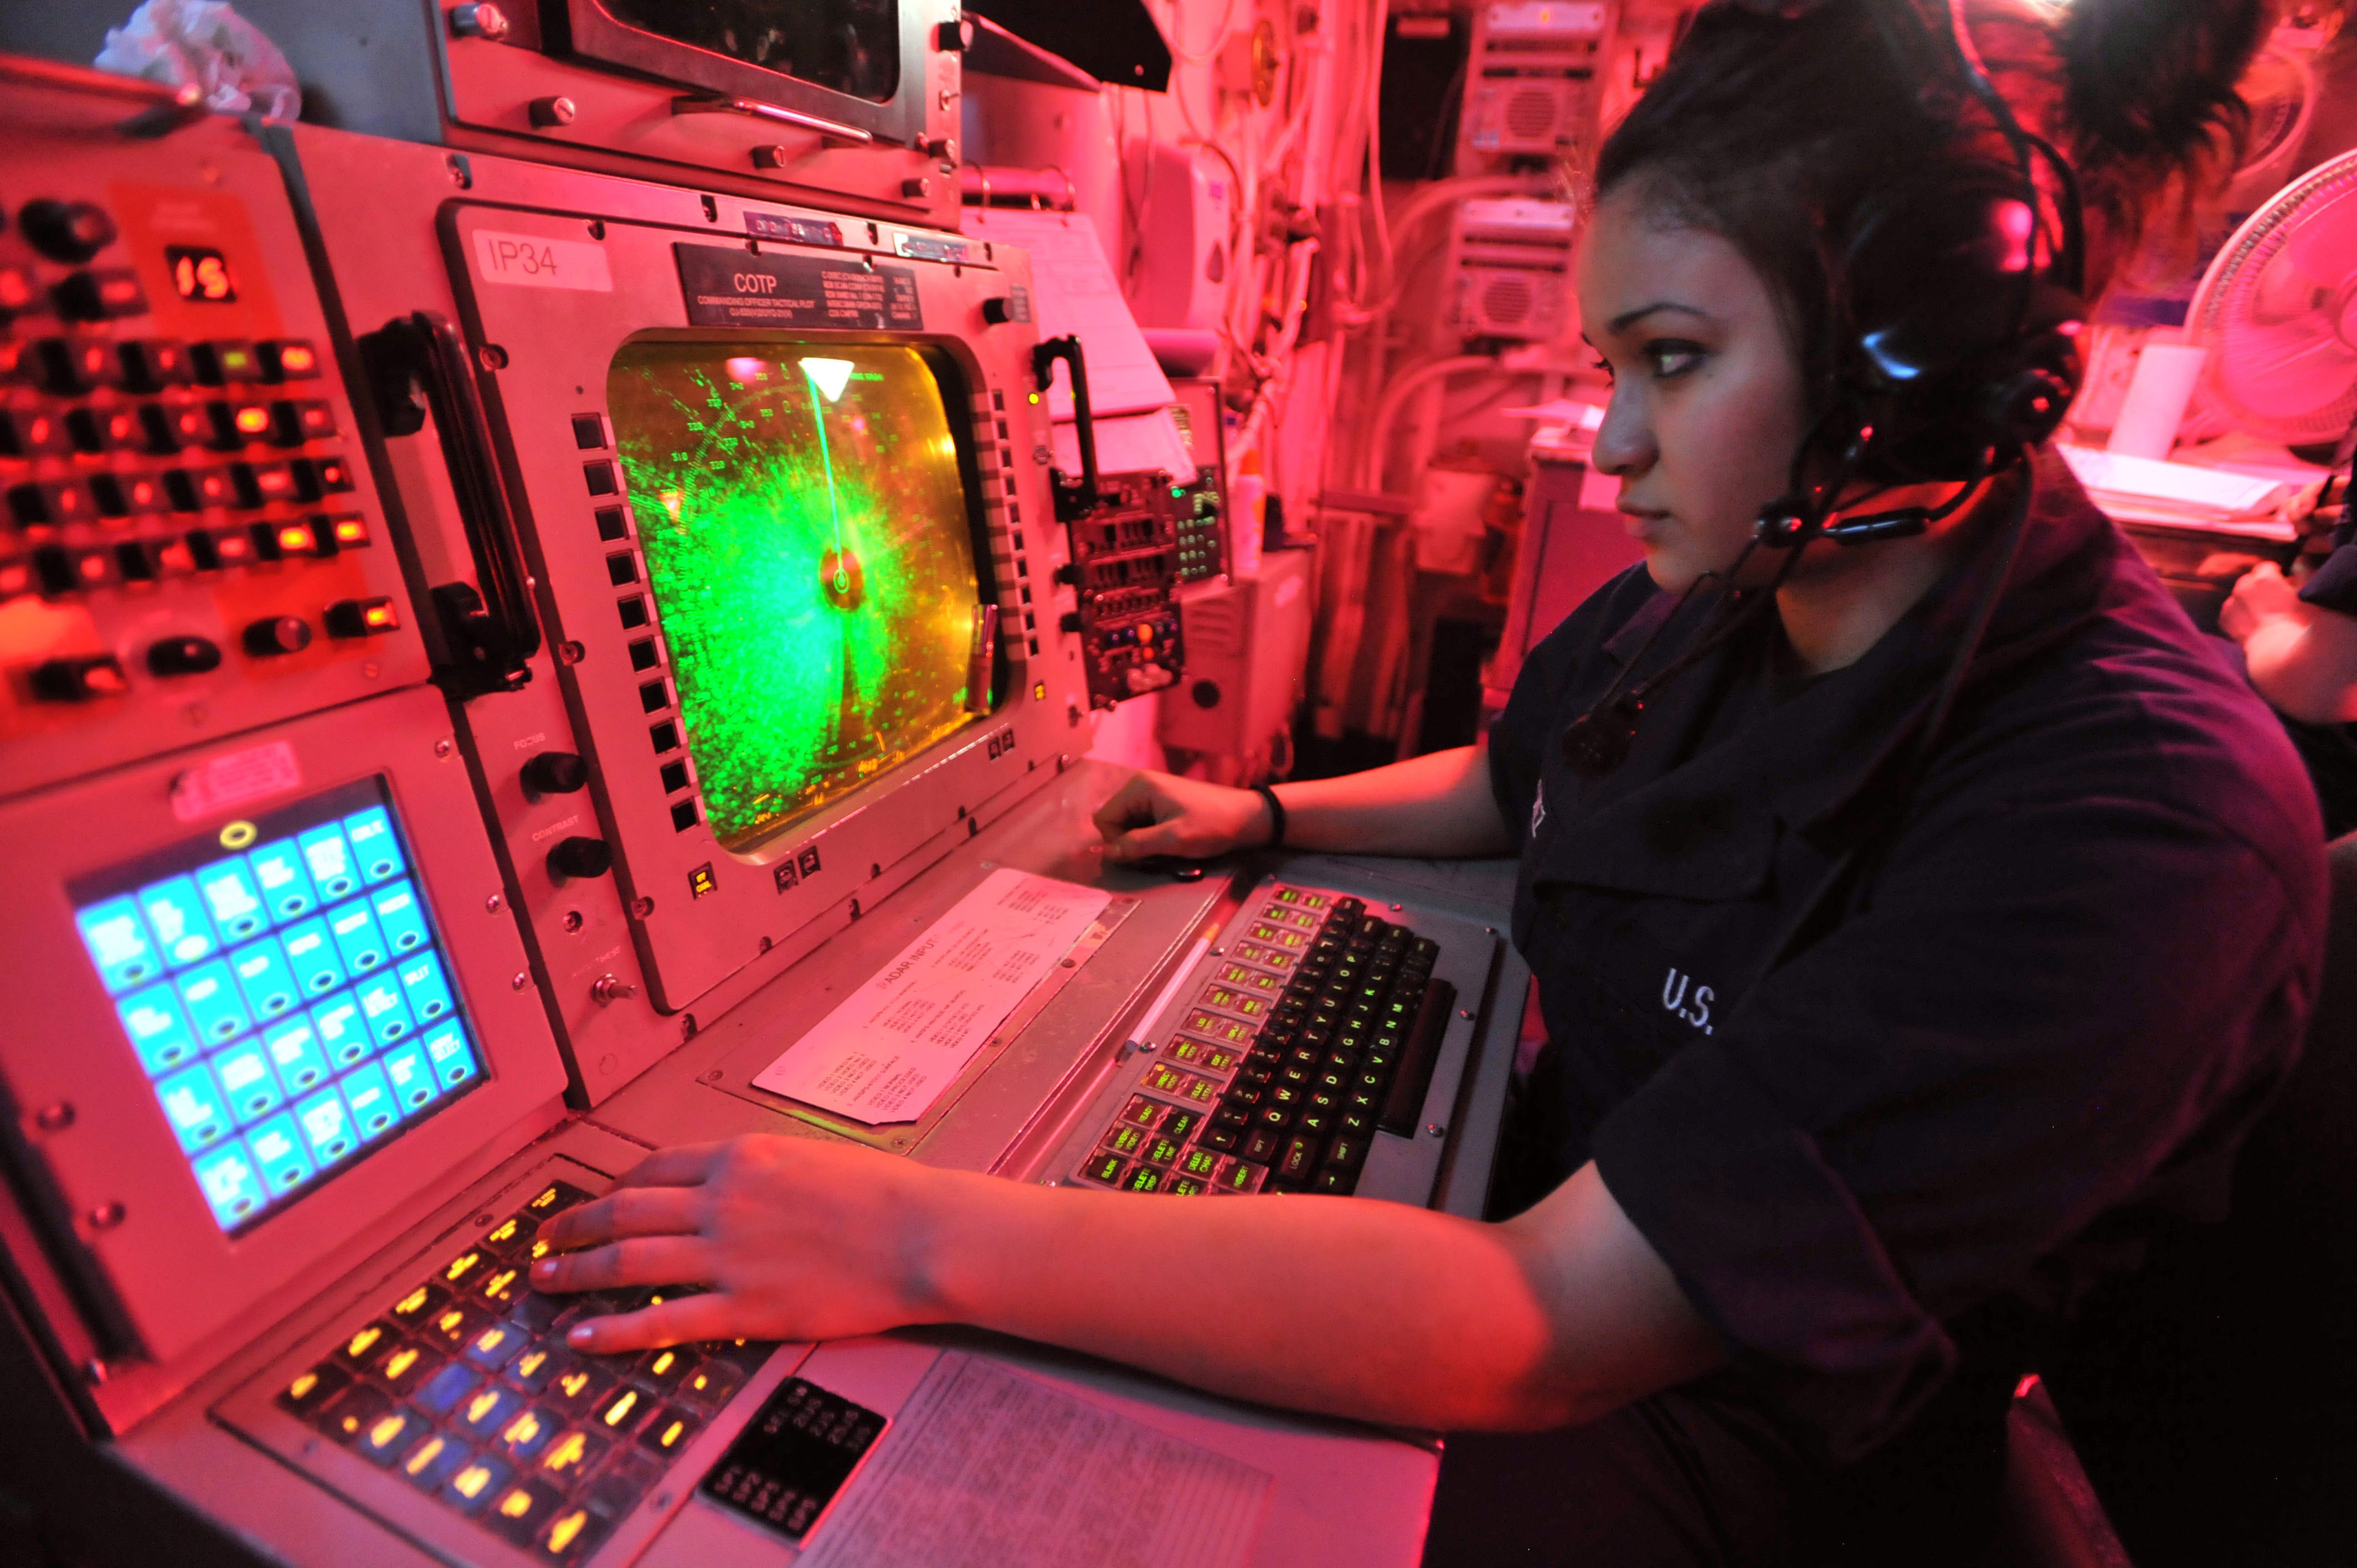 Defense.gov News Photo 110426-N-0569K-005 - Seaman Nathalie G. Sanchez operates an advanced combat direction system console in the commanding officer s tactical plot room aboard the aircraft